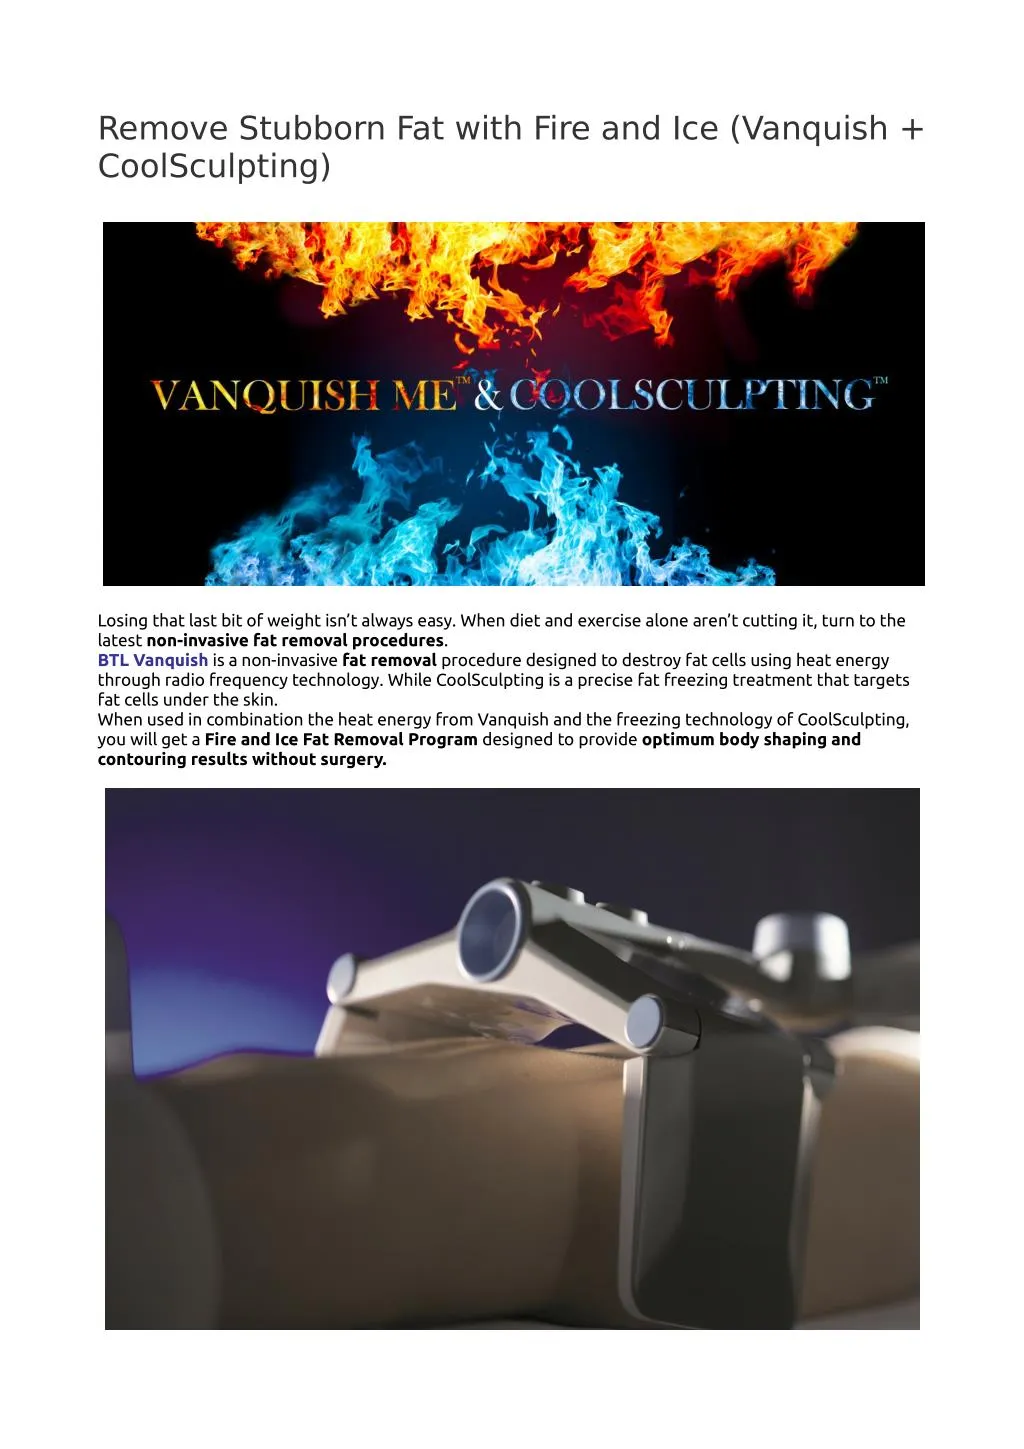 remove stubborn fat with fire and ice vanquish